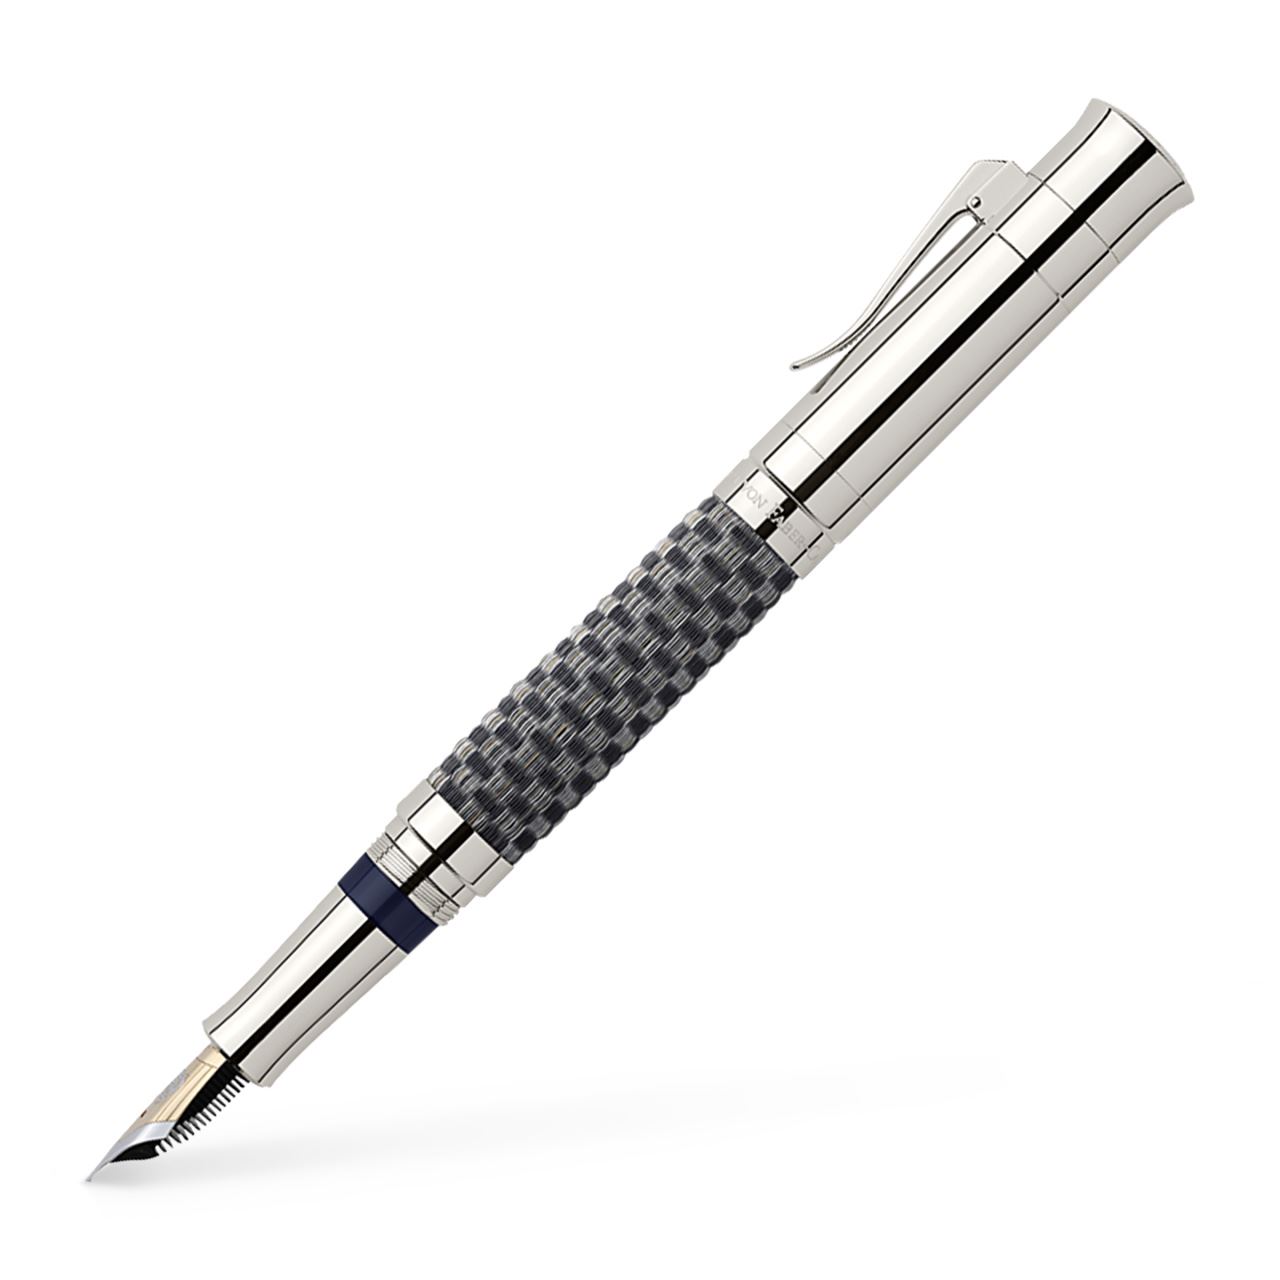 Graf-von-Faber-Castell - Fountain pen Pen of the Year 2009 Broad